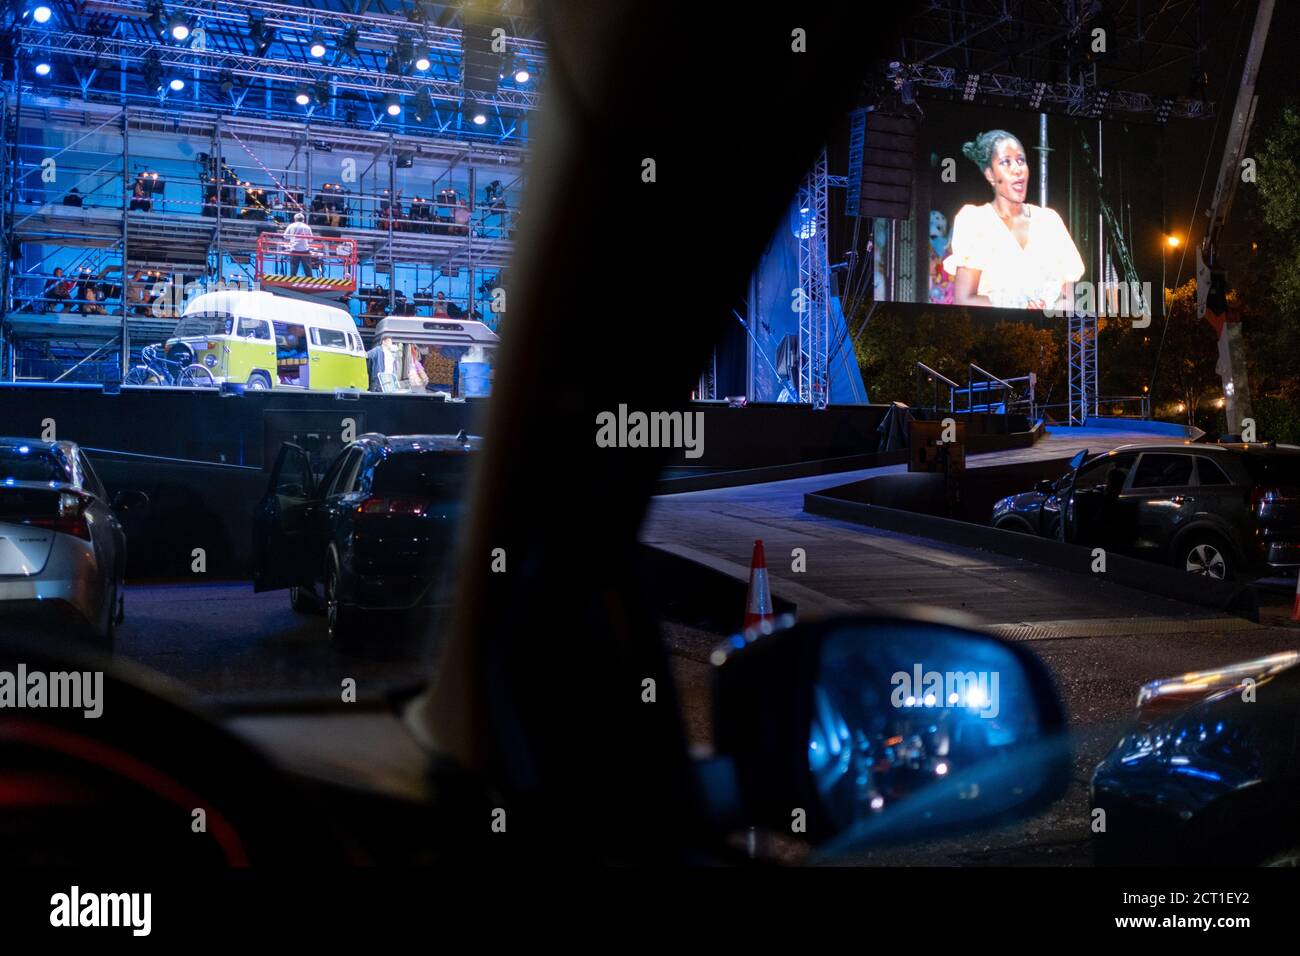 Seen from the driver's seat, British Soprano Nardus Williams plays Mimi in Puccini's La bohème, performed by English National Opera (ENO) as a drive-in (ENO Drive and Live) at Alexandra Palace, on 18th September 2020, in London, England. This is ENO's first public performance since the closure of their West End Colisseum home venue, because of the Coronavirus pandemic lockdown in March. This is Europe's first live drive-in opera production that audiences can safely experience from their cars and ENO's first public performance since the closure of their West End Colisseum home venue, because of Stock Photo